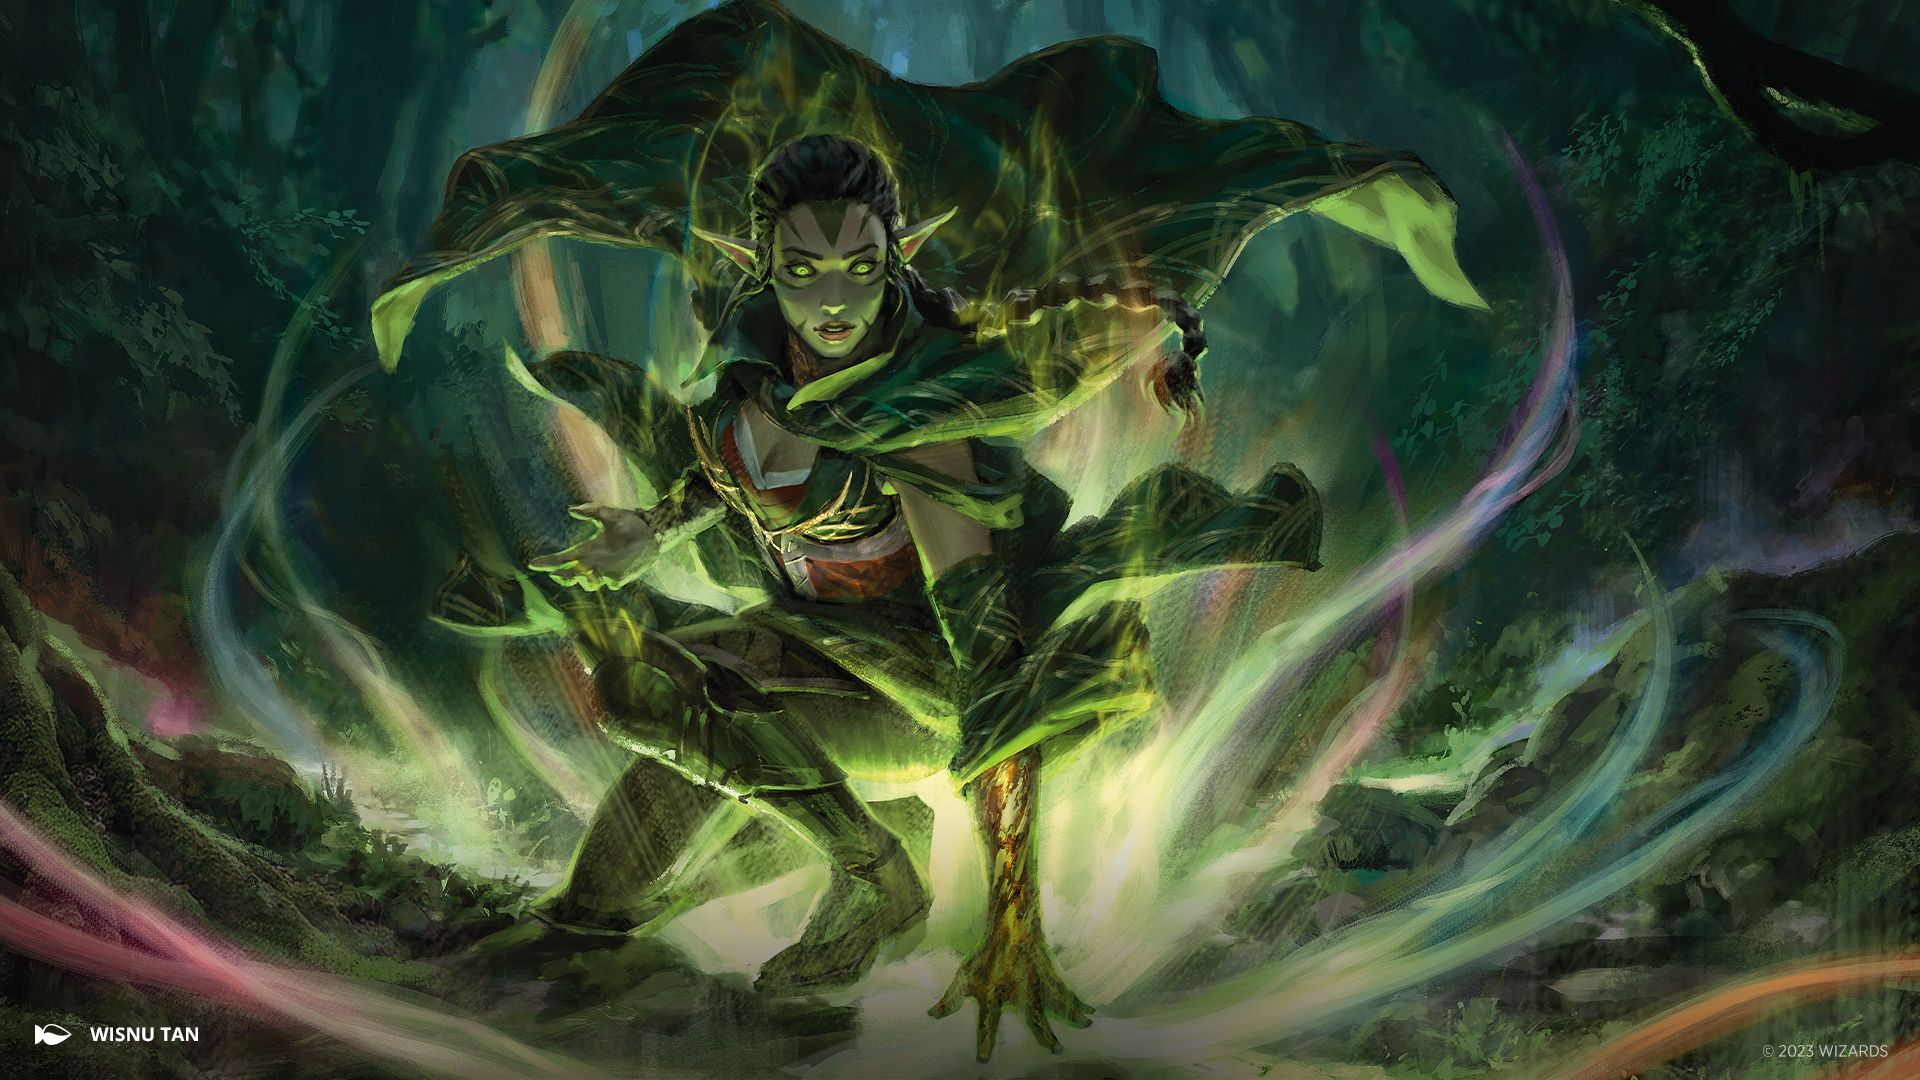 March Of The Machine: The Aftermath Story Brings Nissa And Chandra To The Precipice Of Infinite Possibilities